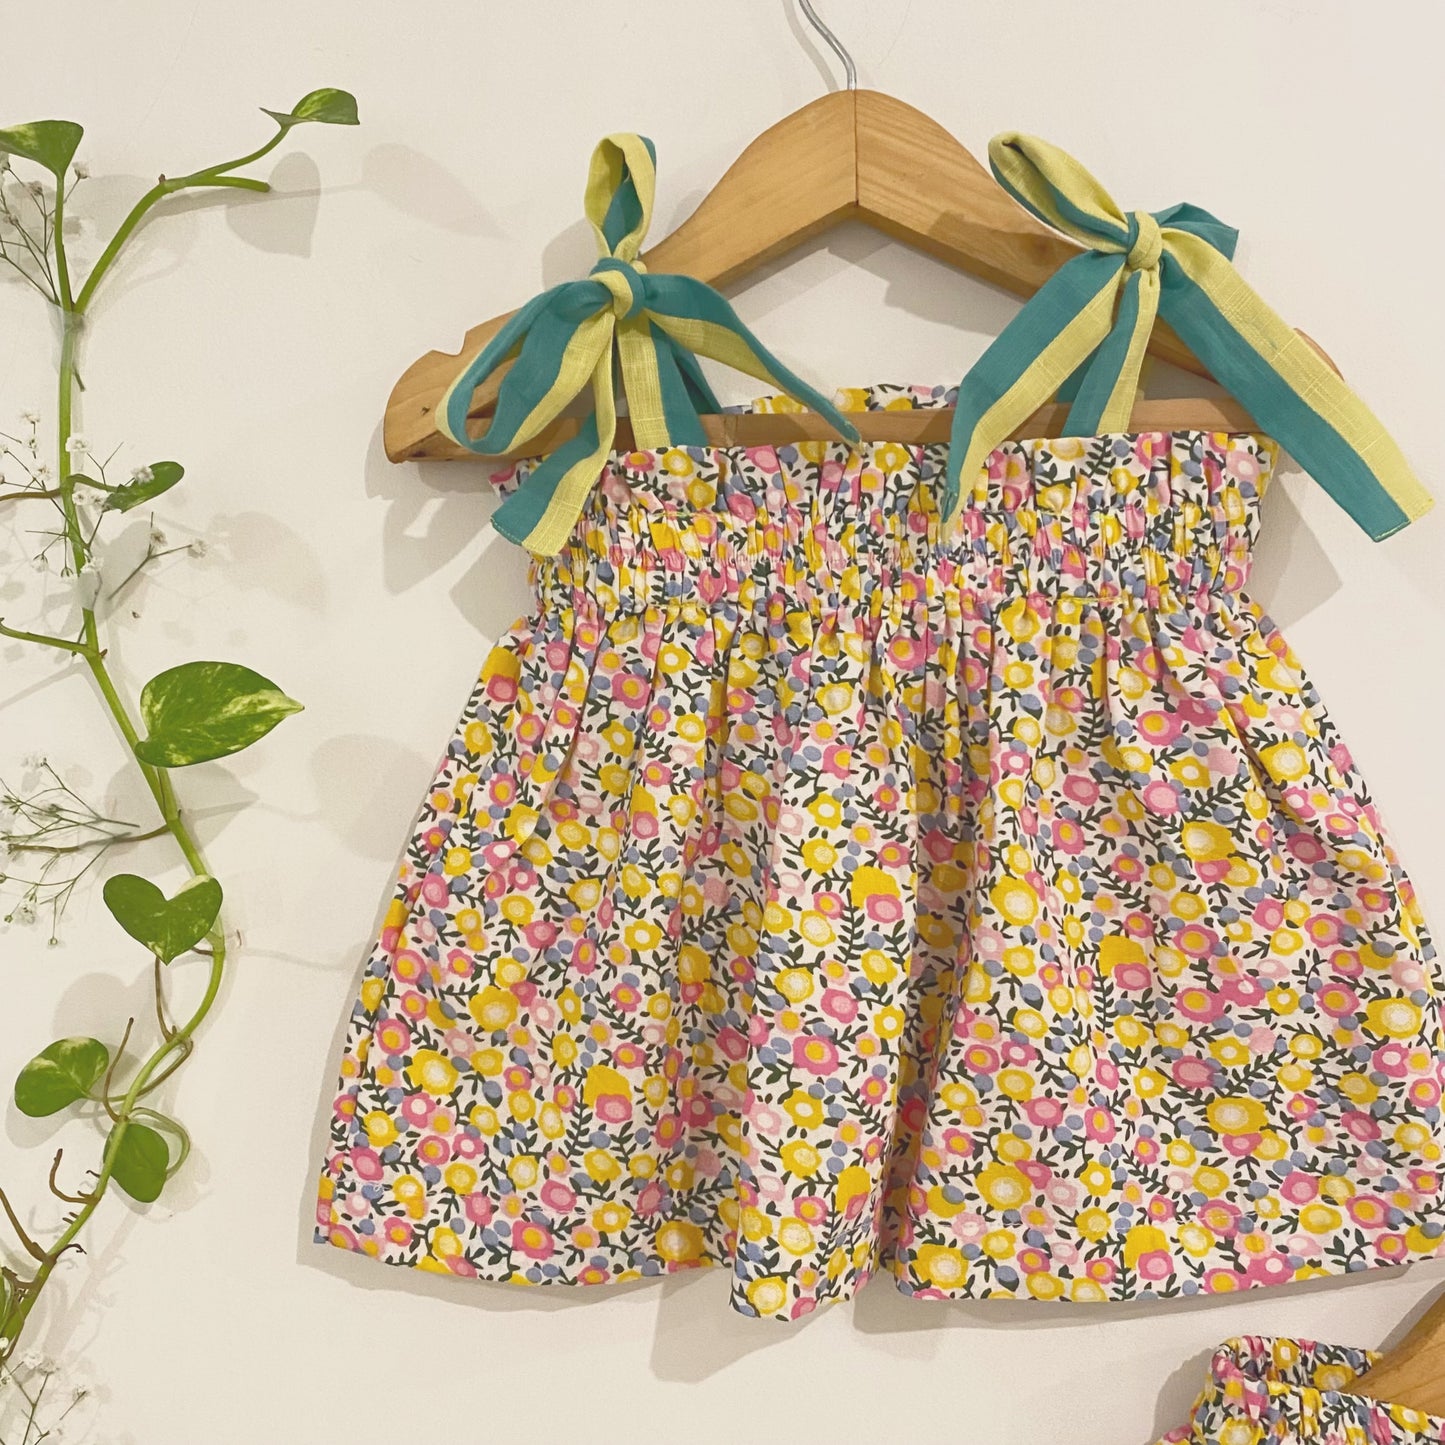 Floral shorts coord